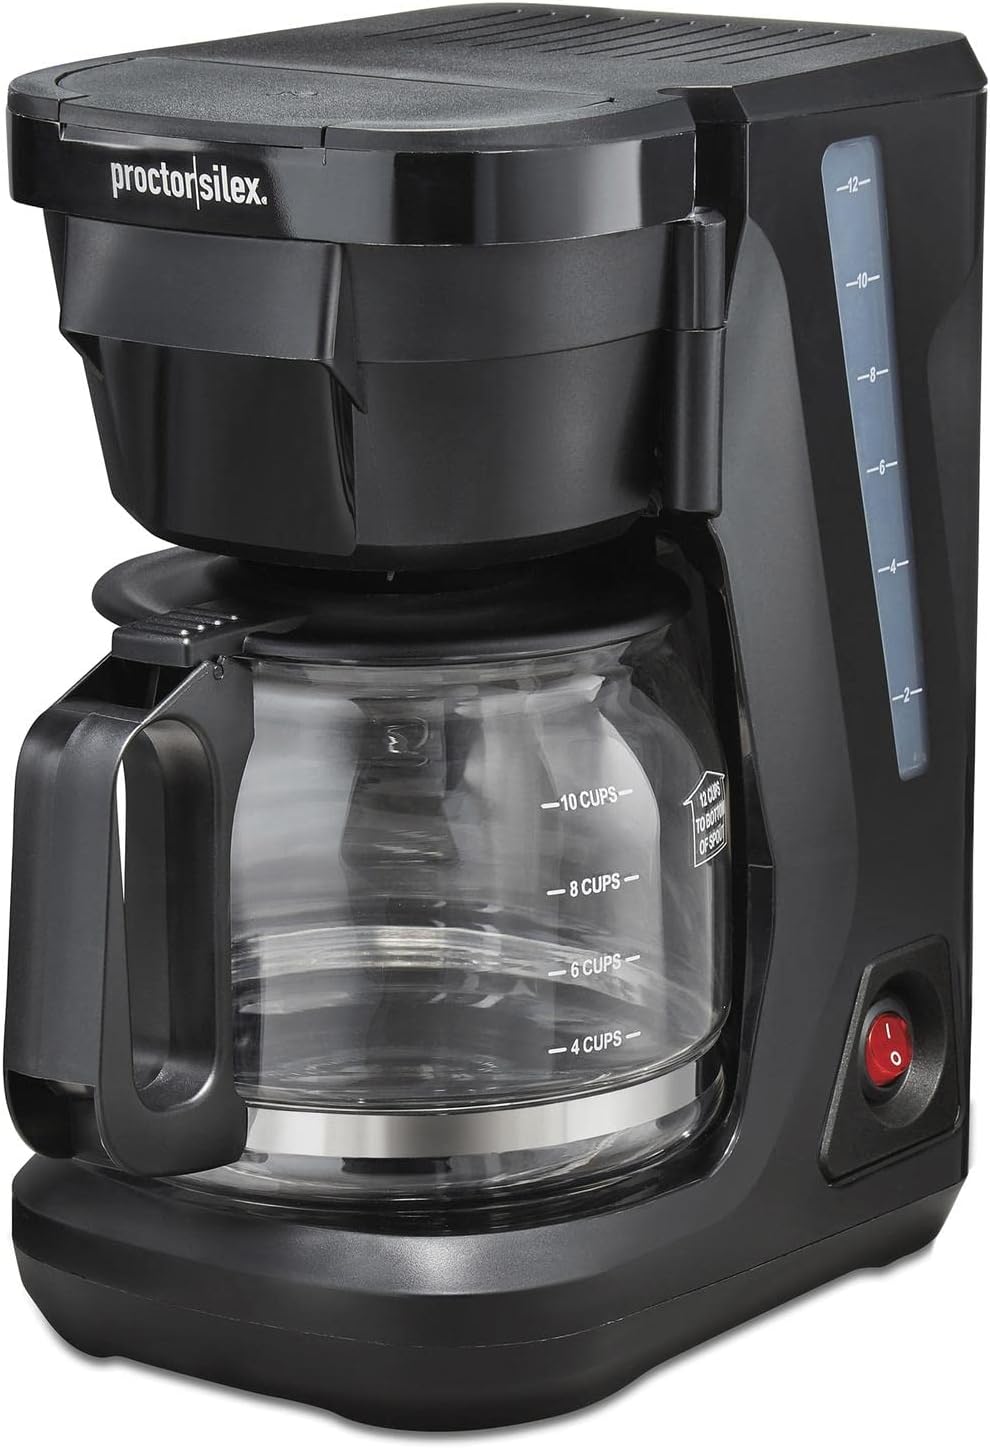 Proctor Silex FrontFill Drip Coffee Maker, Digital  Programmable, 12 Cup Glass Carafe, Black and Silver (43685PS)